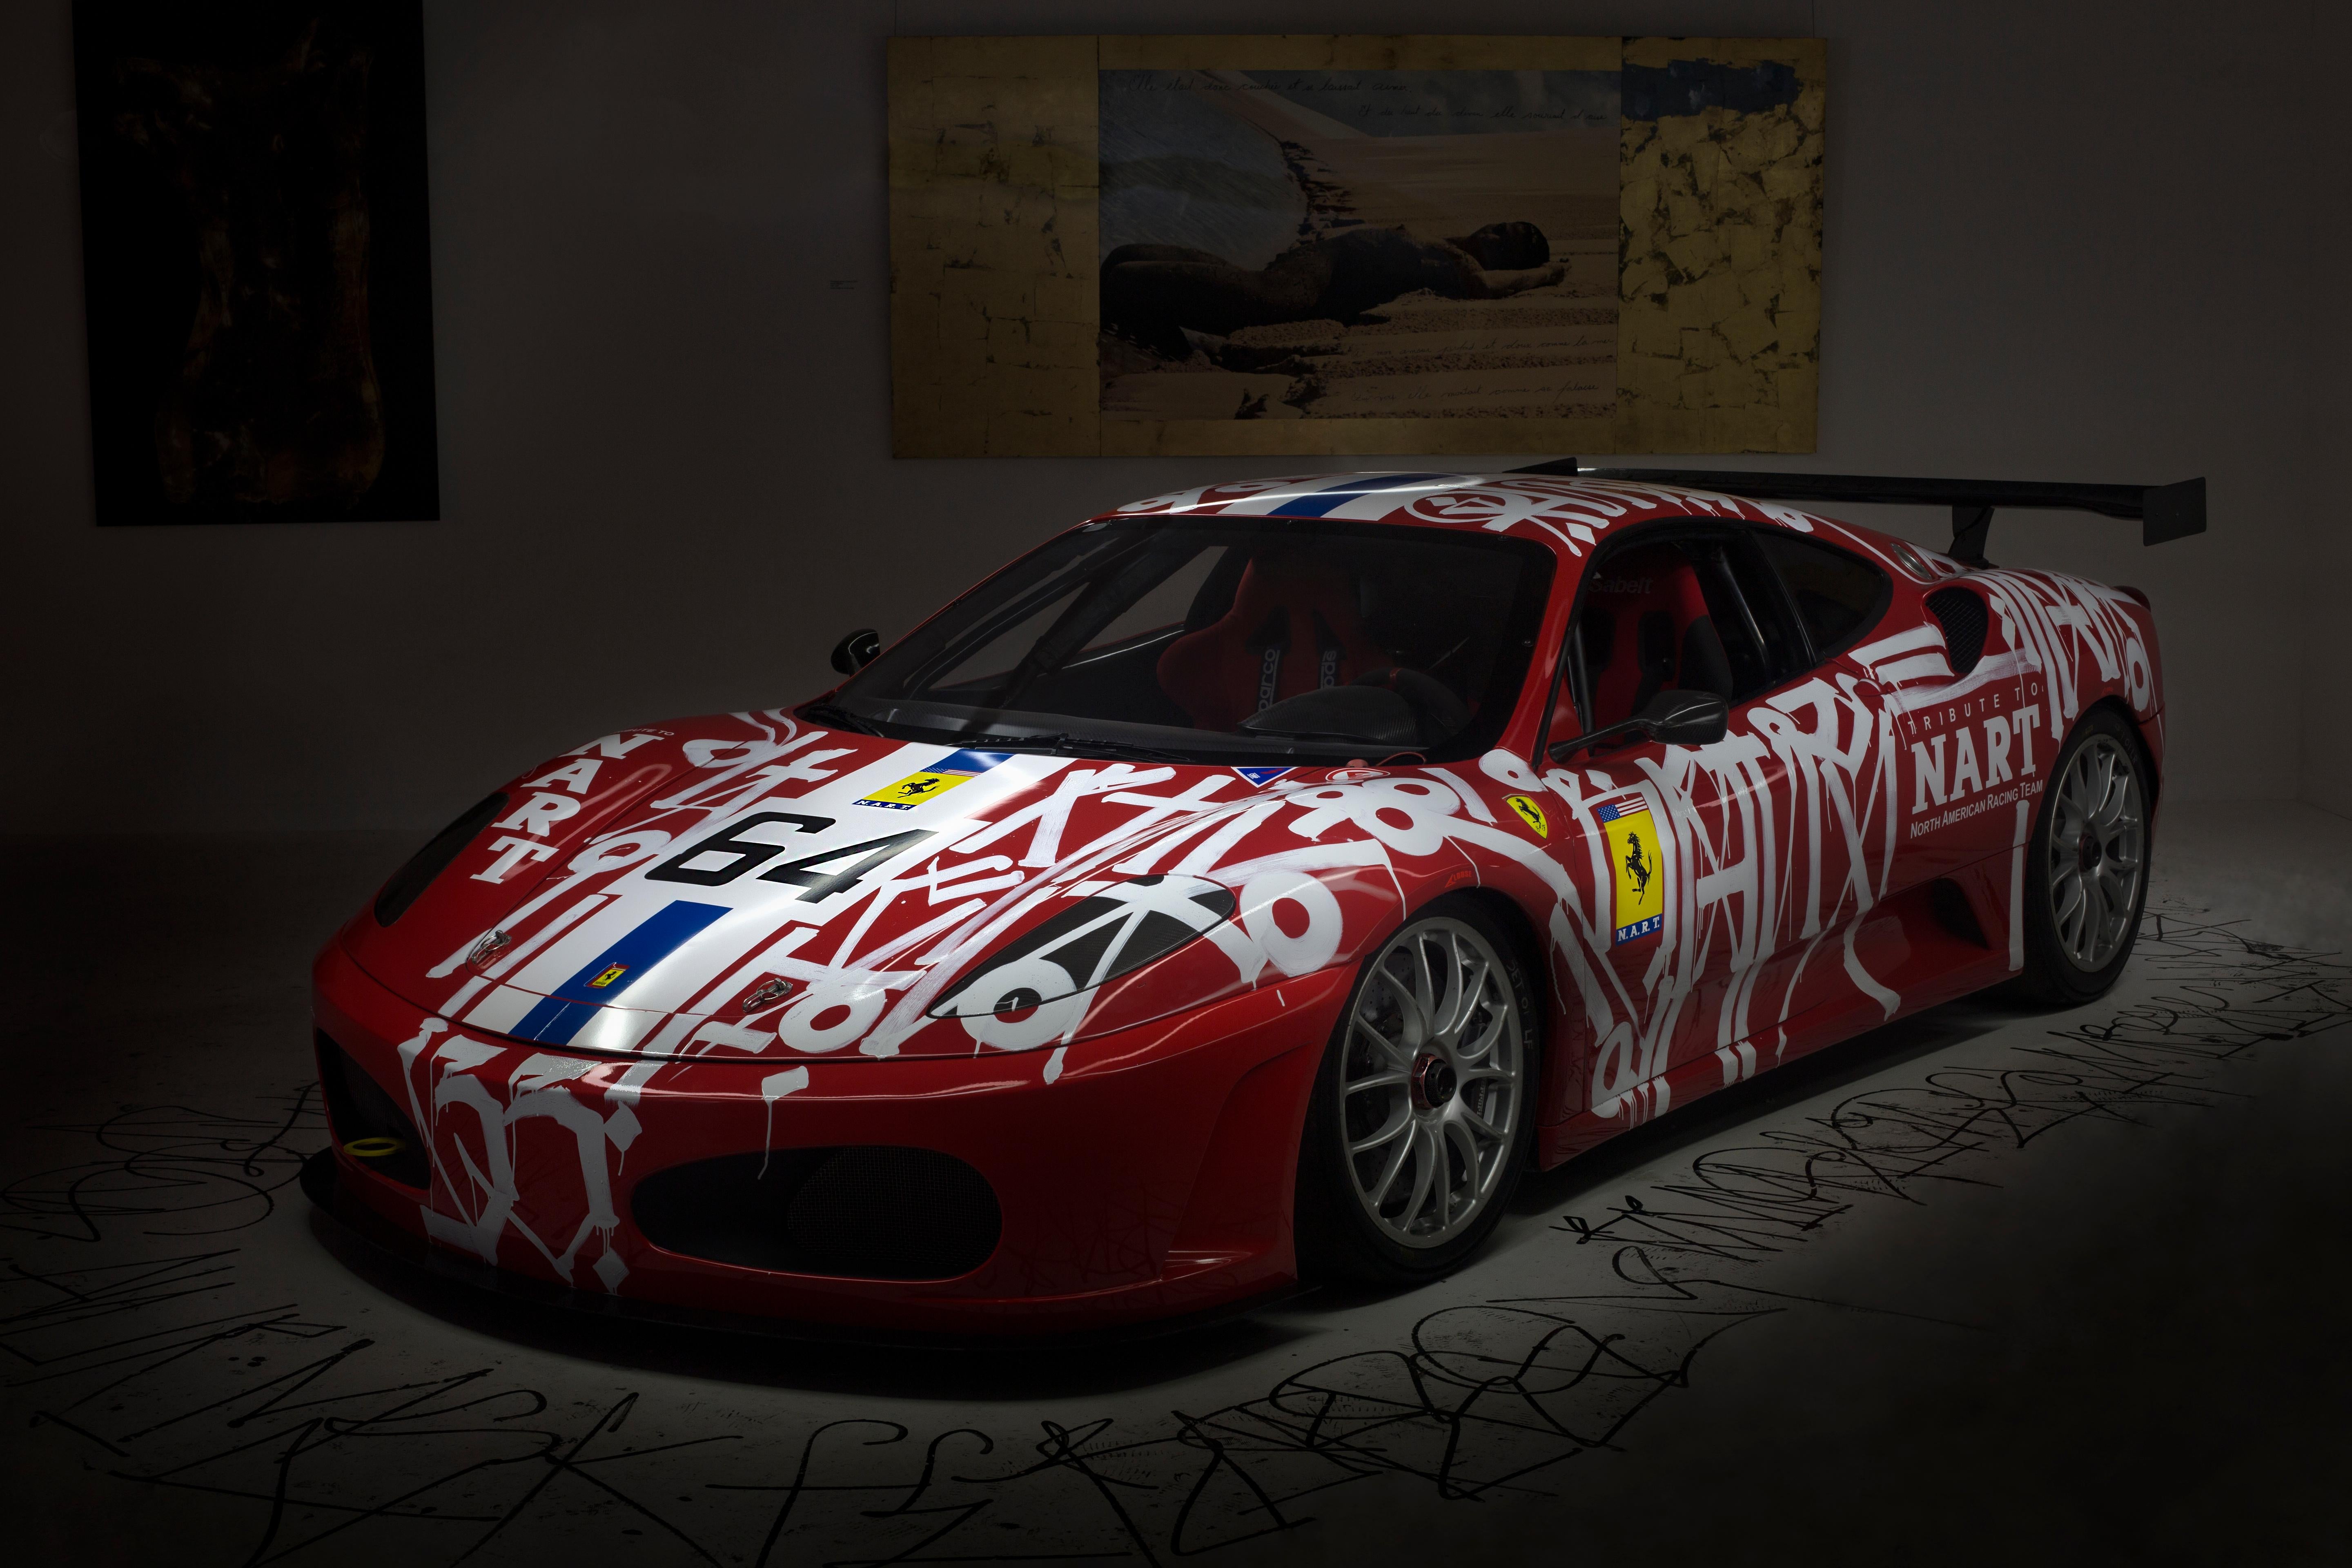  Ferrari F430 Challenge car that was turned into an art car by Marquis Lewis, also known as RETNA.

RETNA is known for his art that was inspired by Egyptian hieroglyphics and calligraphy from Asia and the Middle East. His styling can be seen across